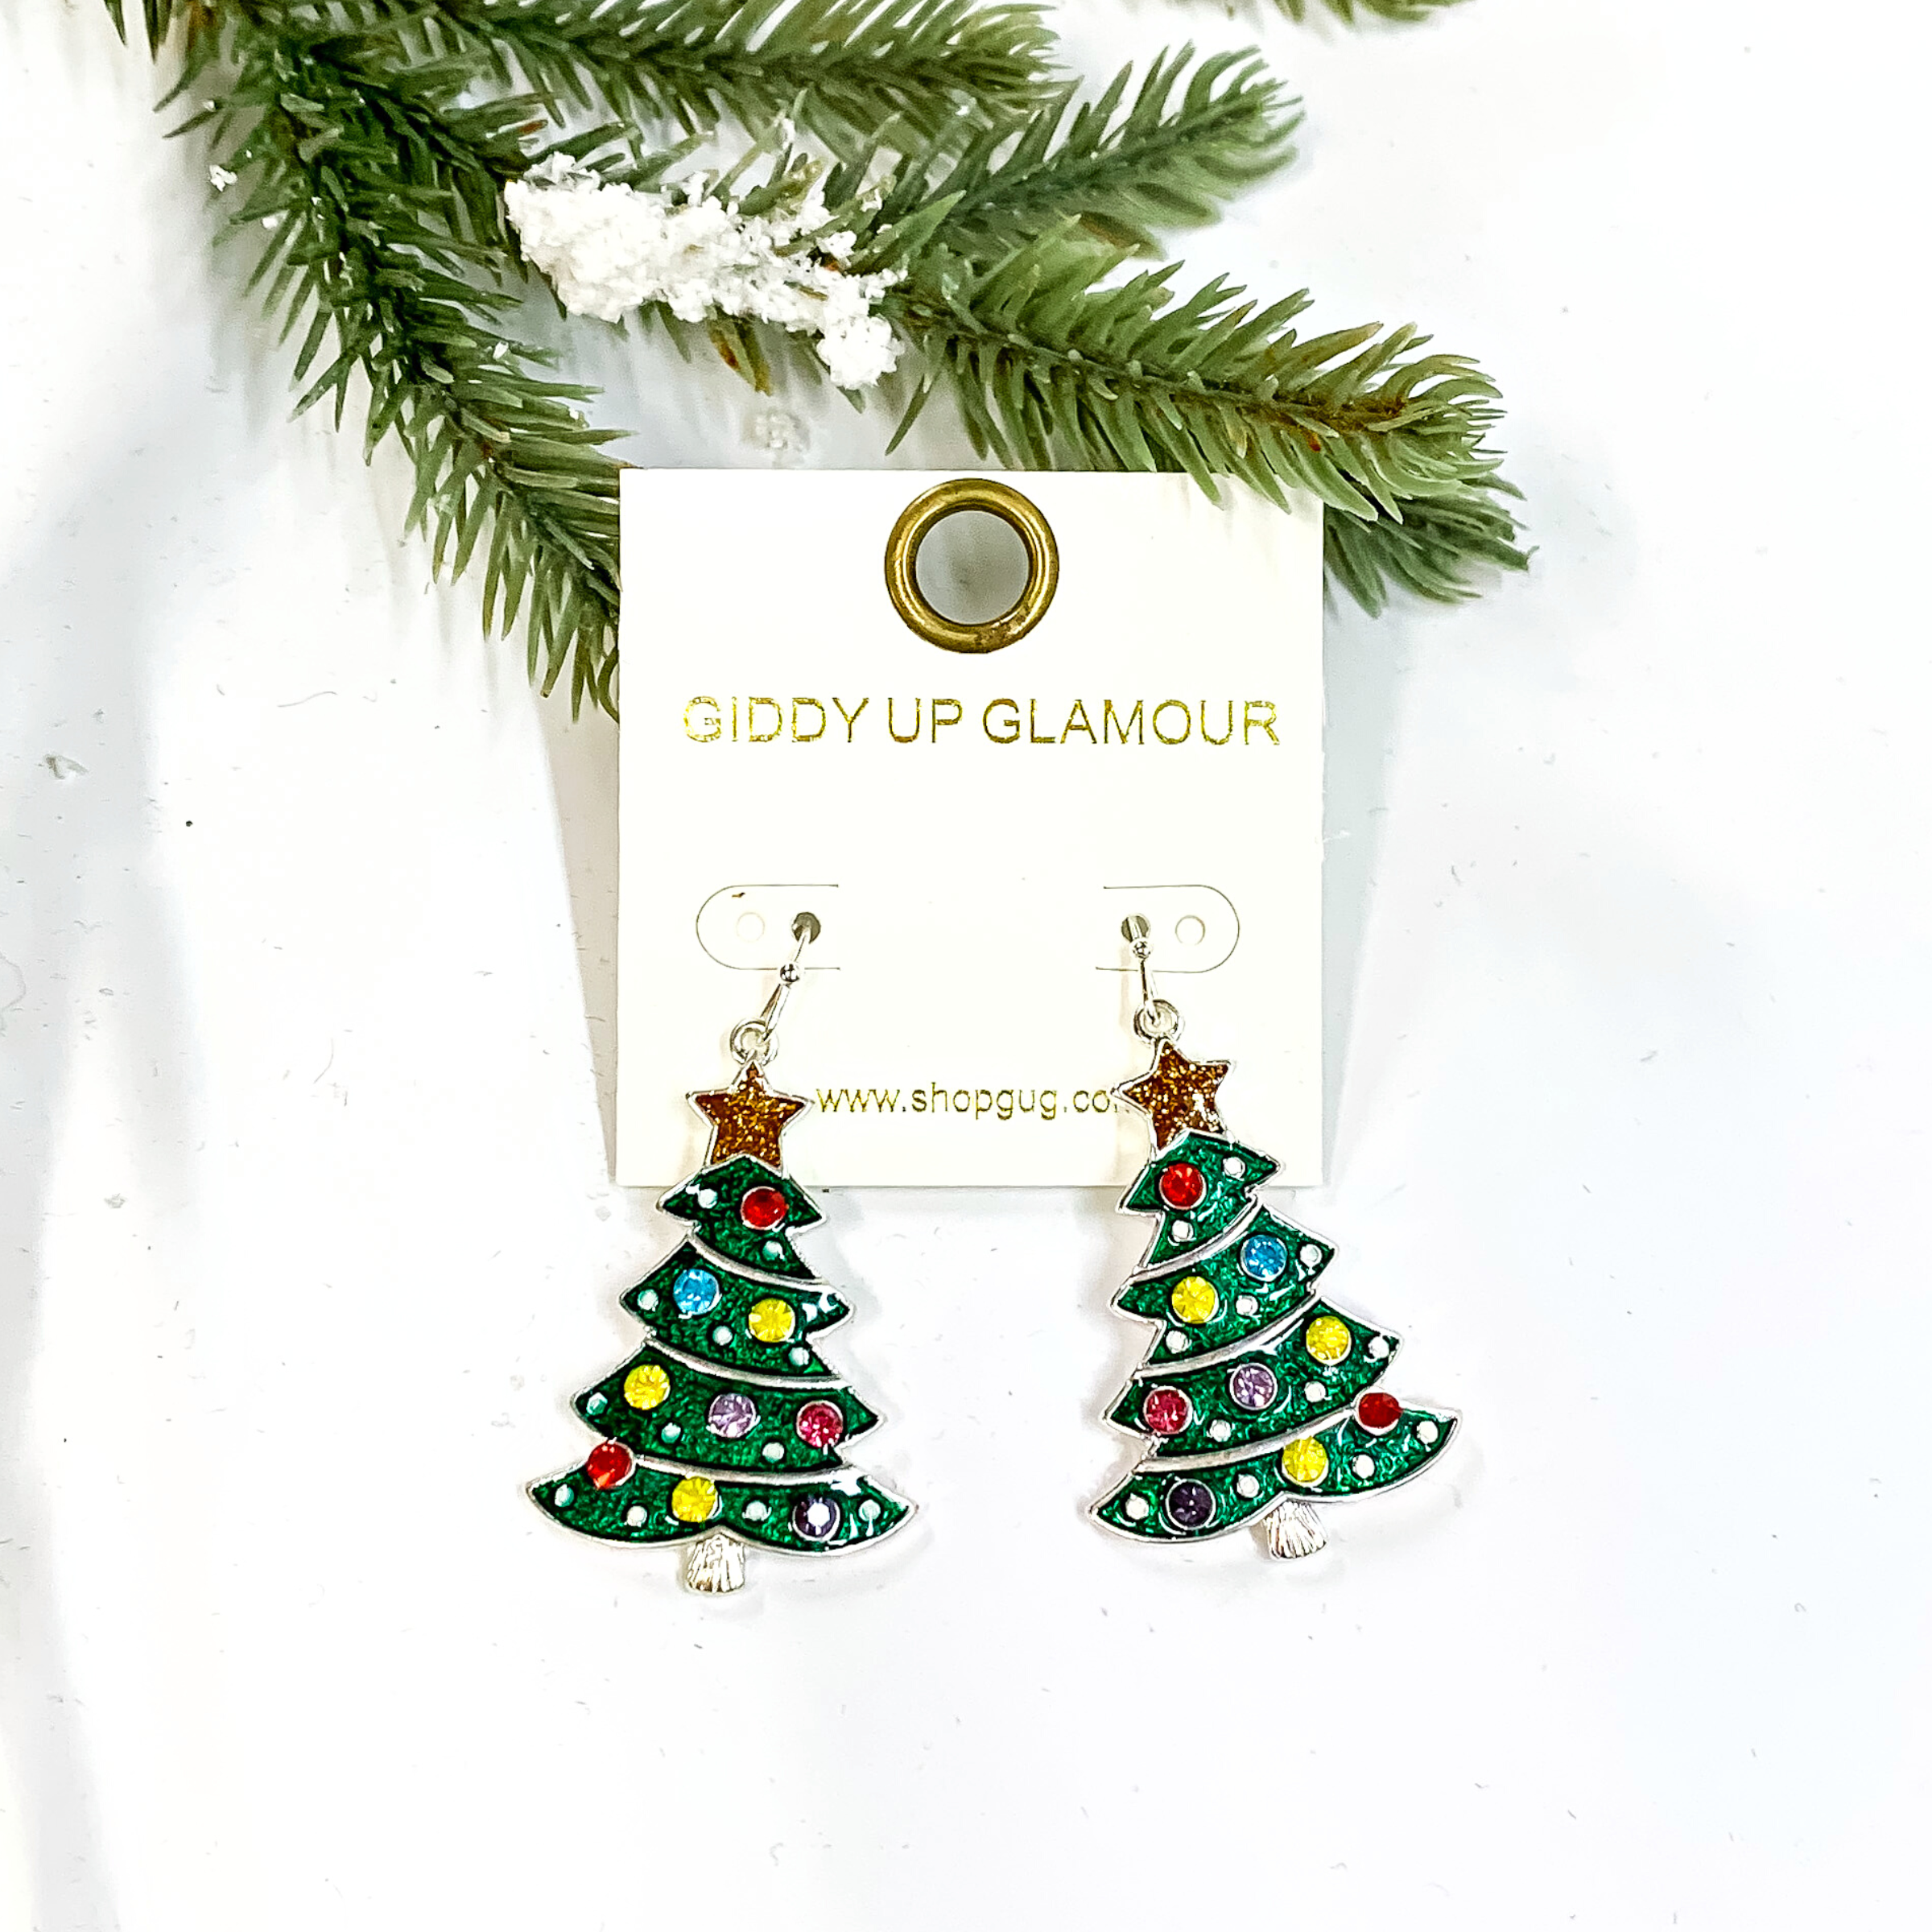 These are green Christmas tree earrings in a silver setting with a gold star on top. The tree has multicolor rhinetsones in red, light purple,purple, pink, yellow, and turquoise as 'ornaments'. These earrings are laying on a white background with a green tree  and snow in the back as decor,